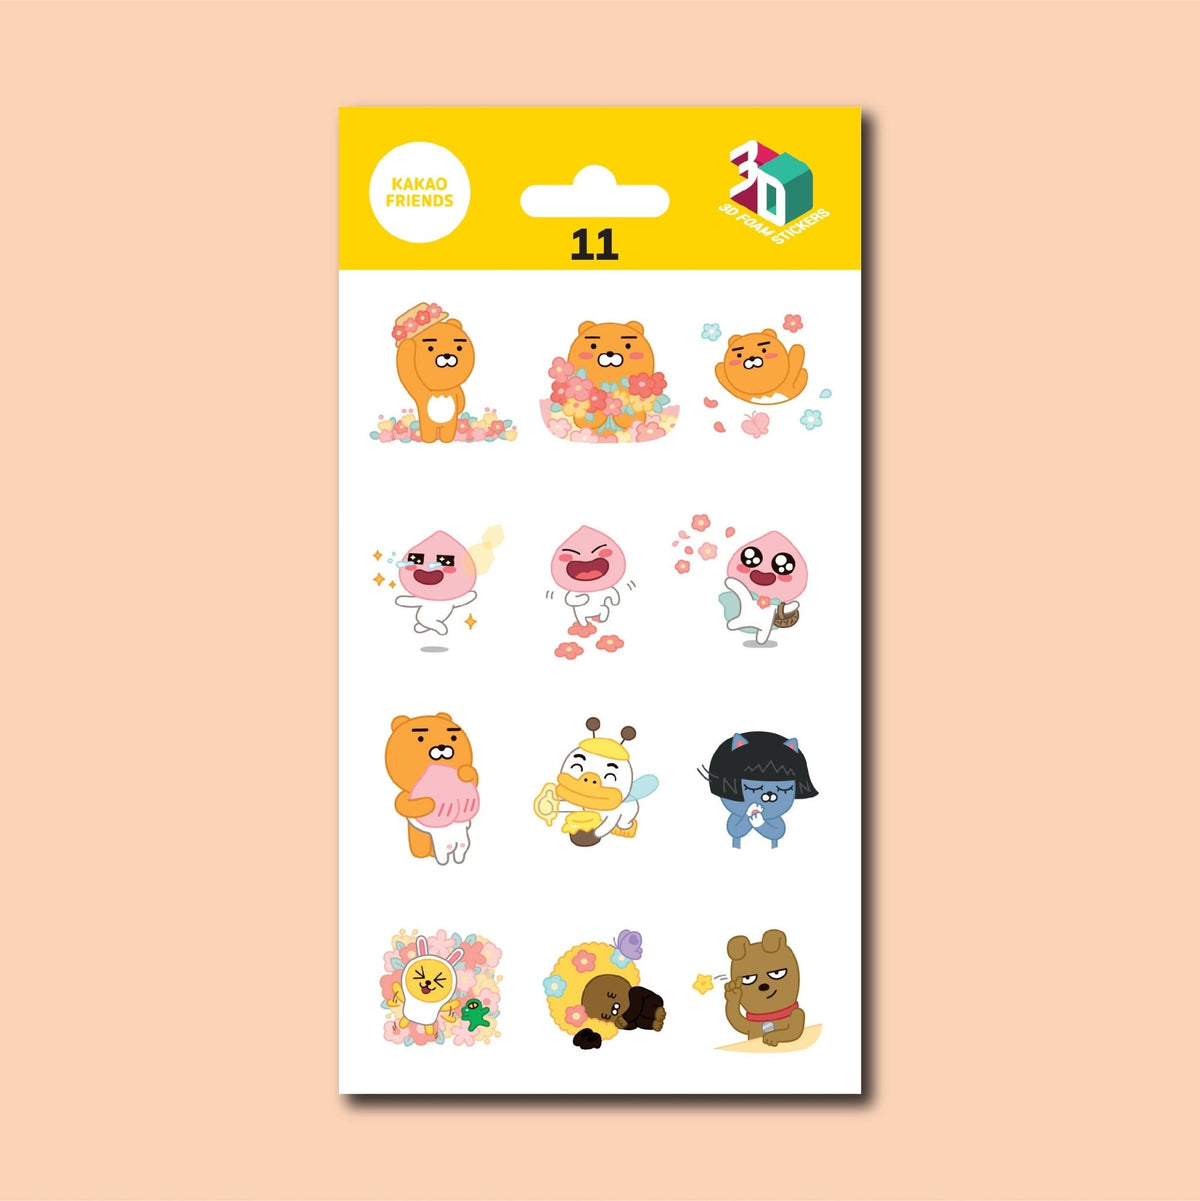 KAKAO FRIENDS Cute Character 3D Stickers for T-Shirts, Caps, Bags - SkoopMarket